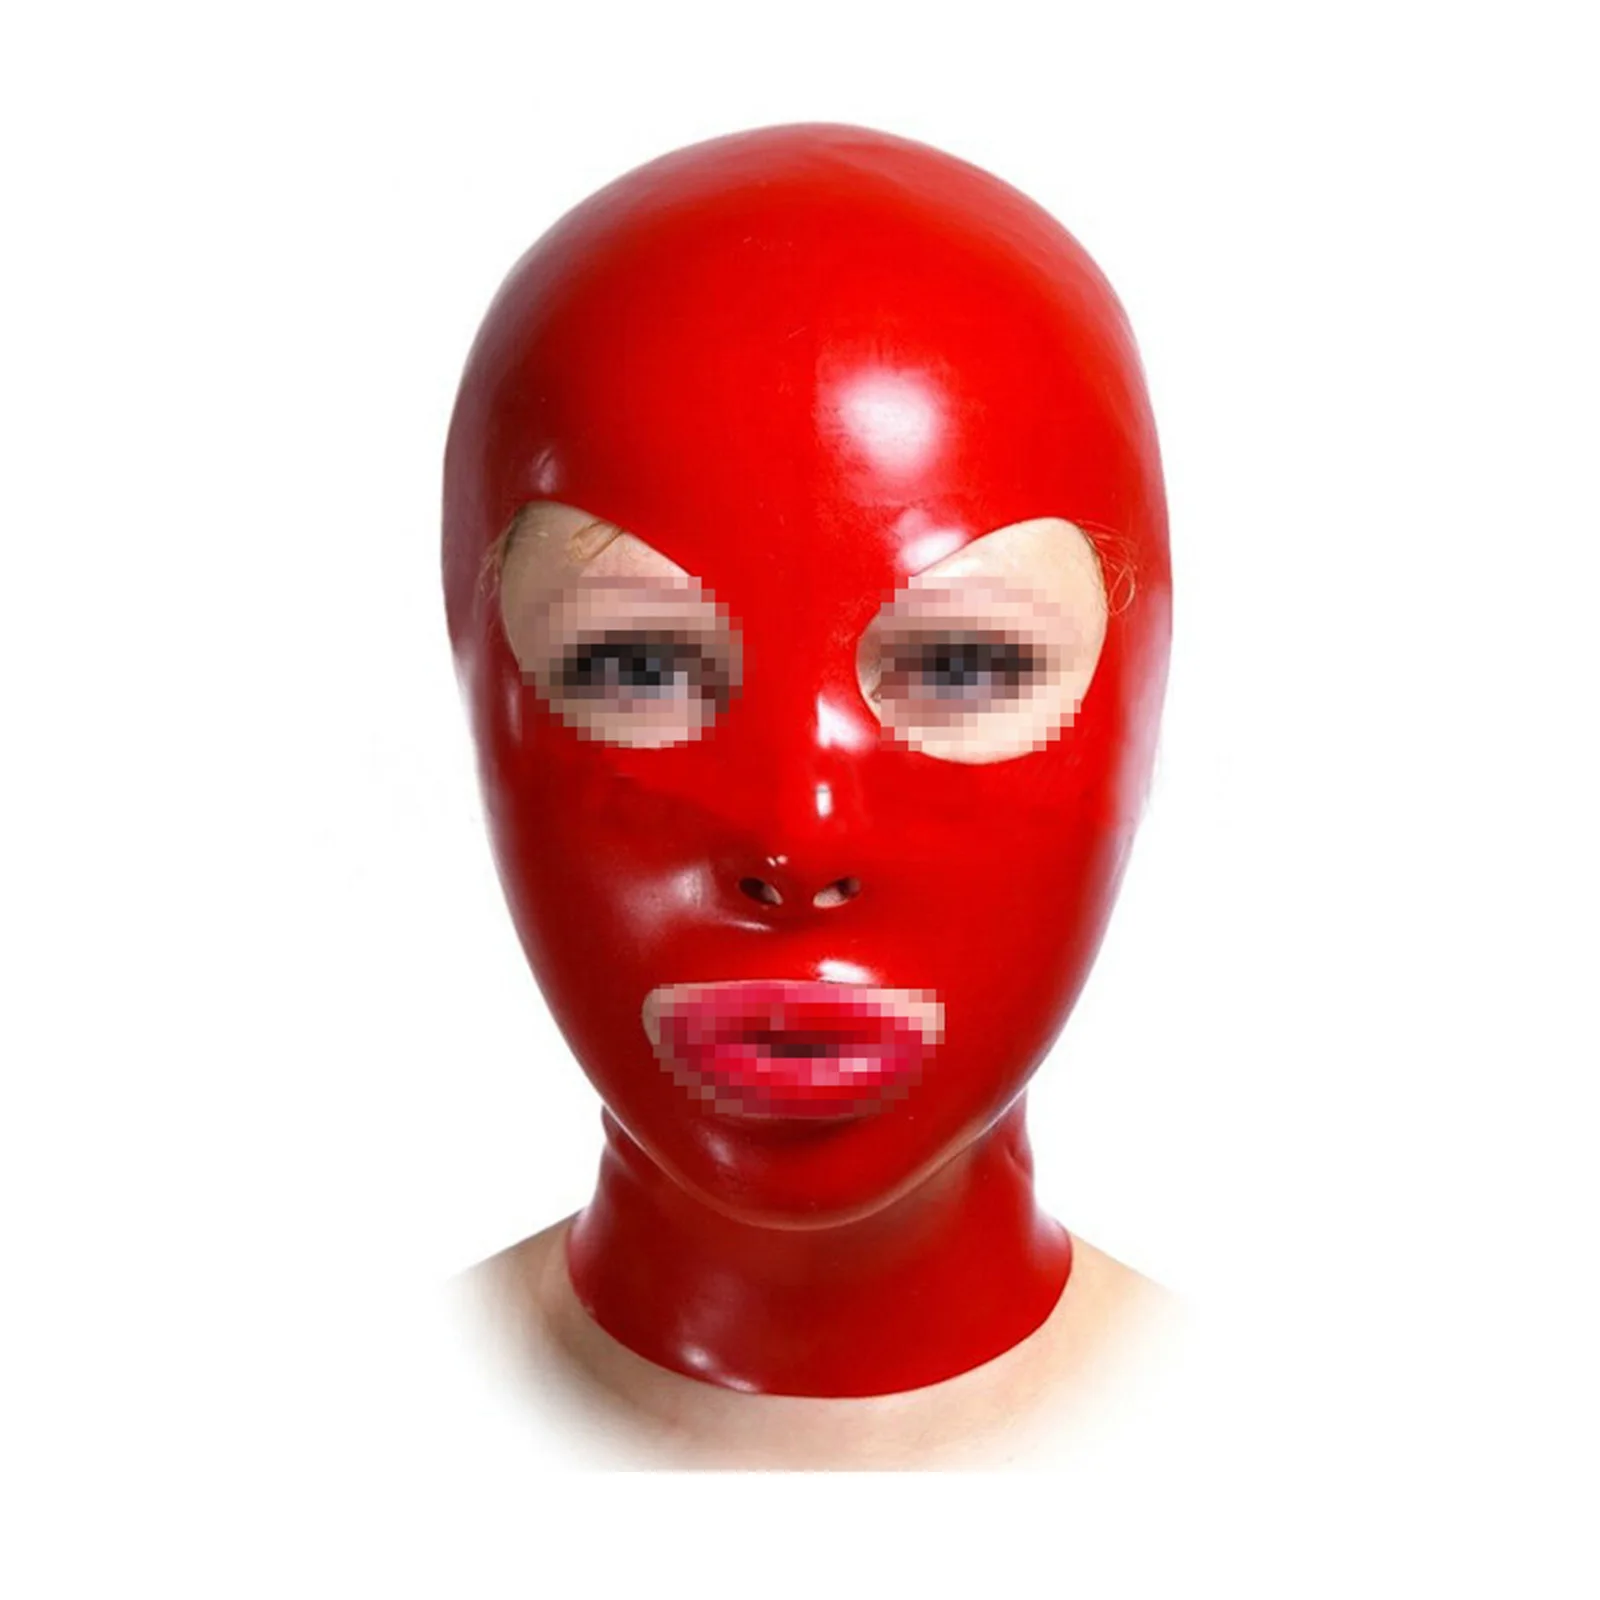 monnik-solid-color-latex-mask-rubber-hood-fetish-headgear-open-eyes-nostrils-mouth-for-party-clubwear-fetish-catsuit-halloween